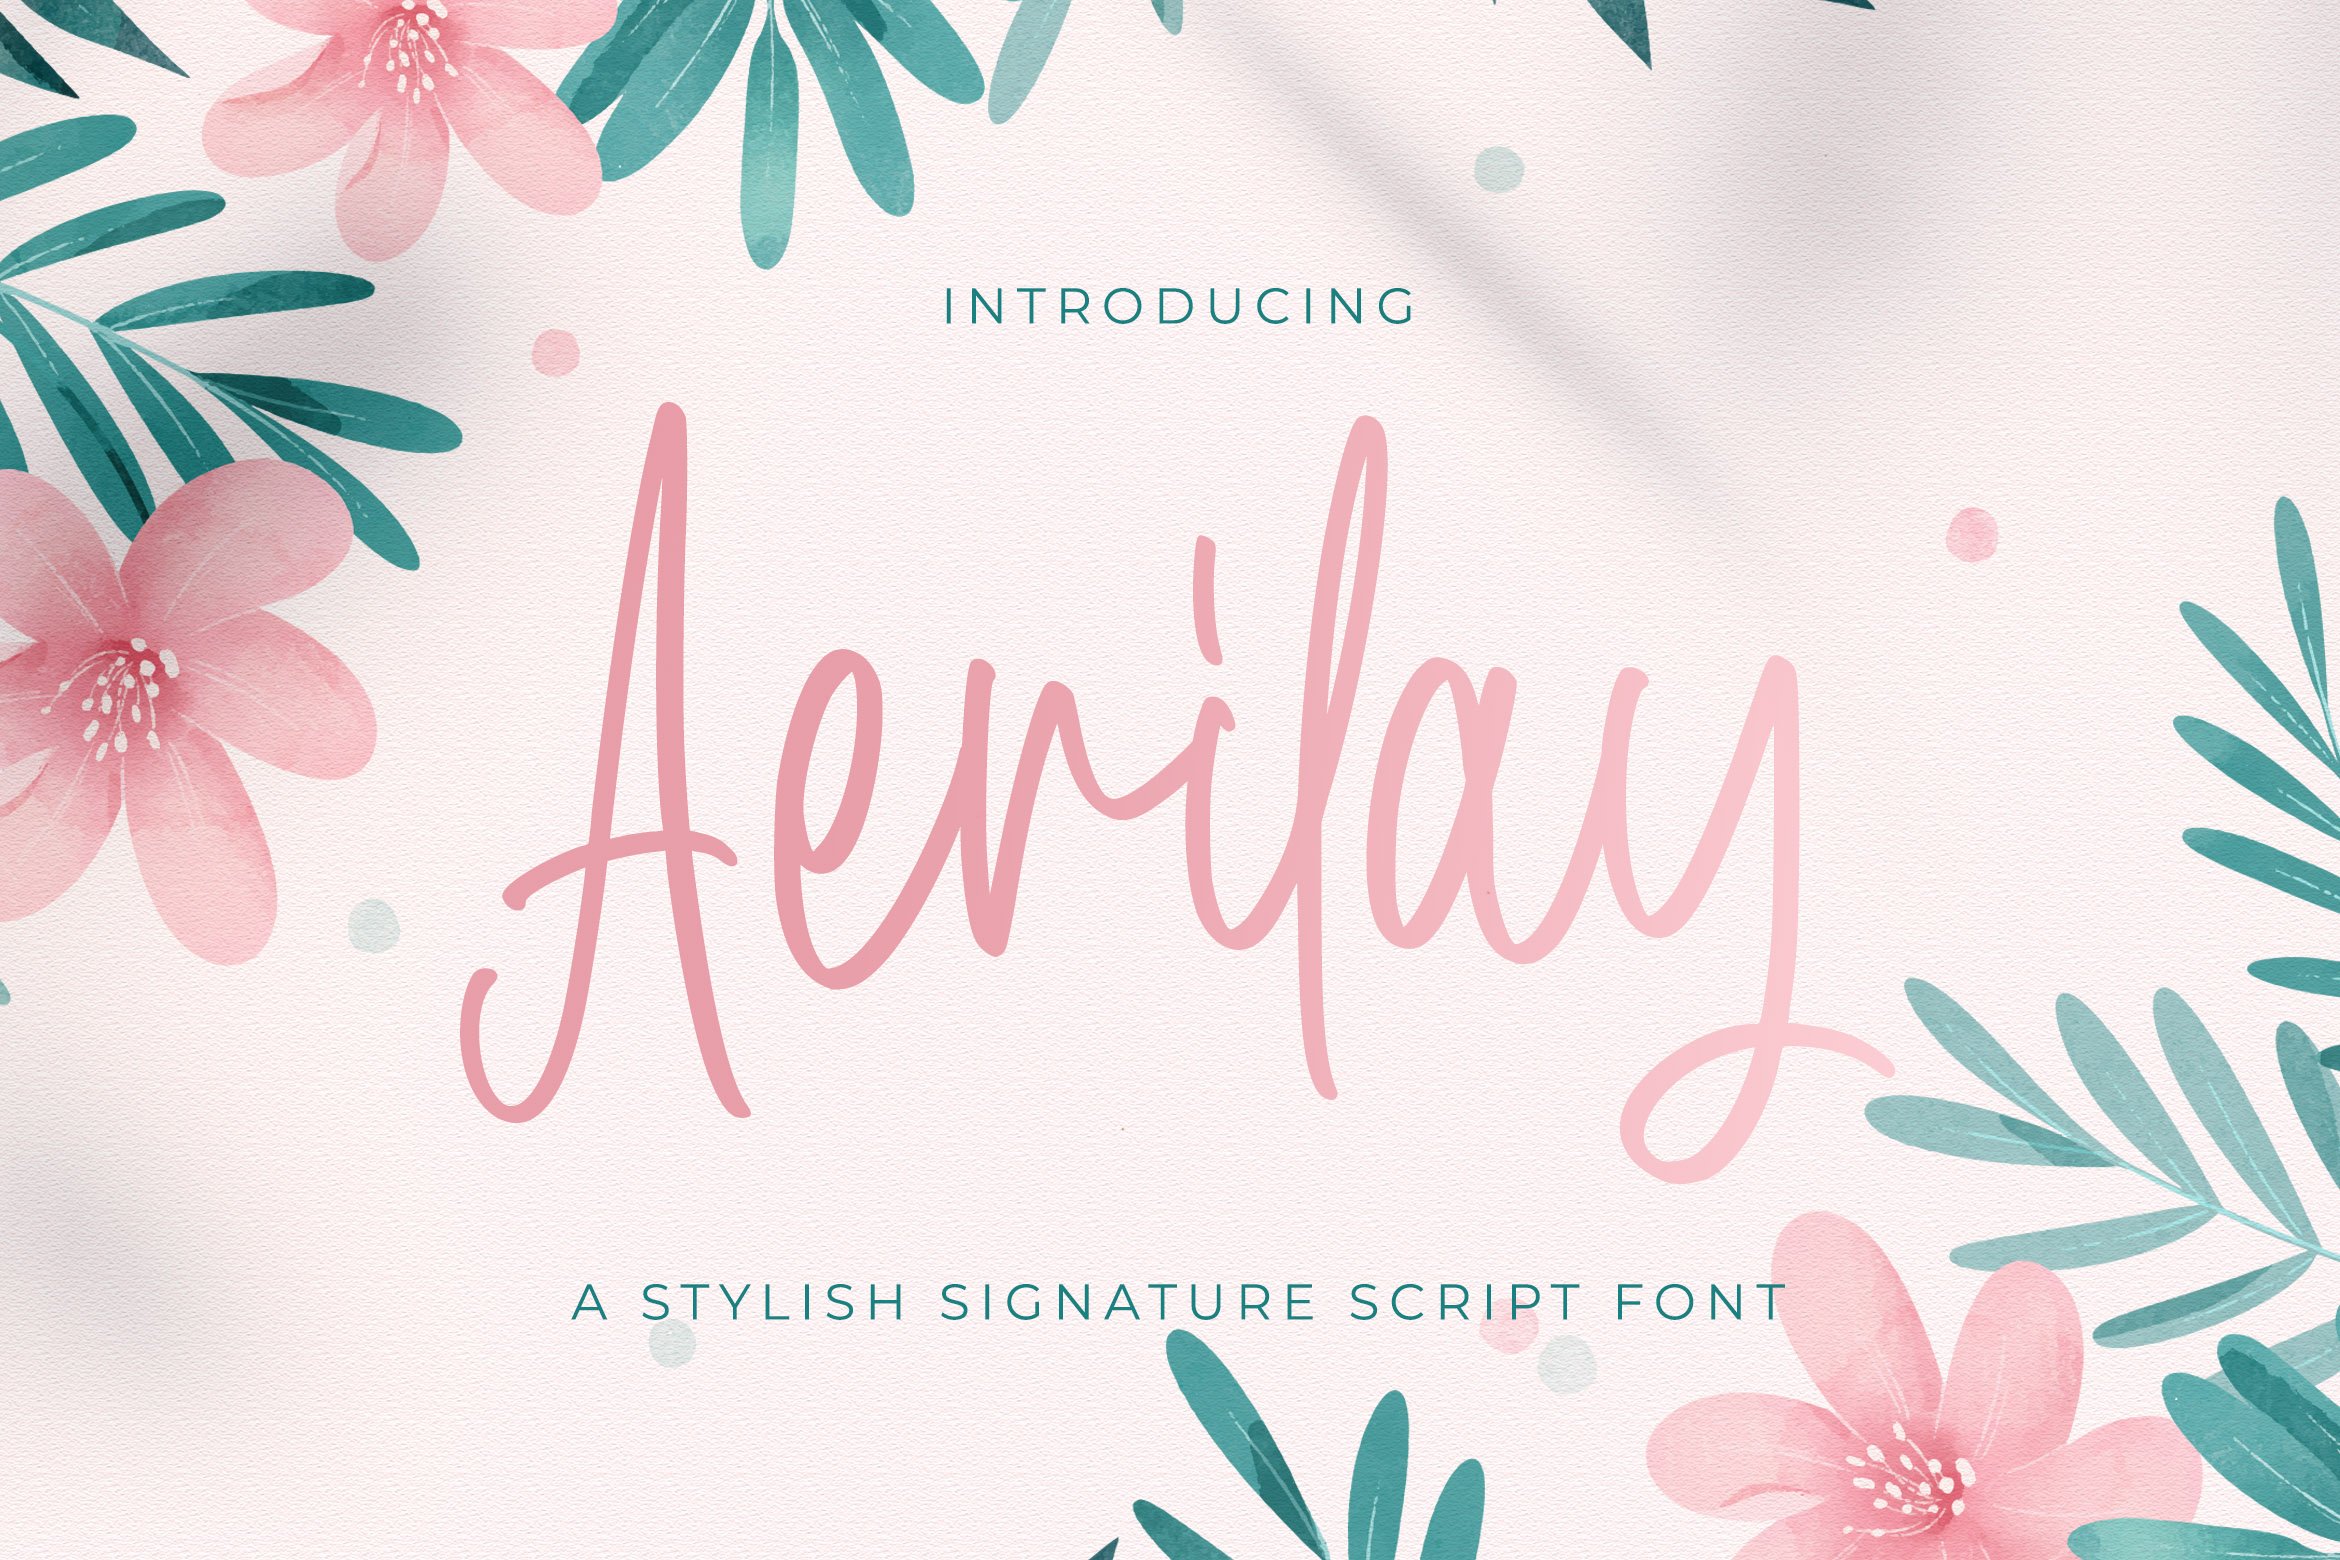 Aerilay - Handwritten Font cover image.